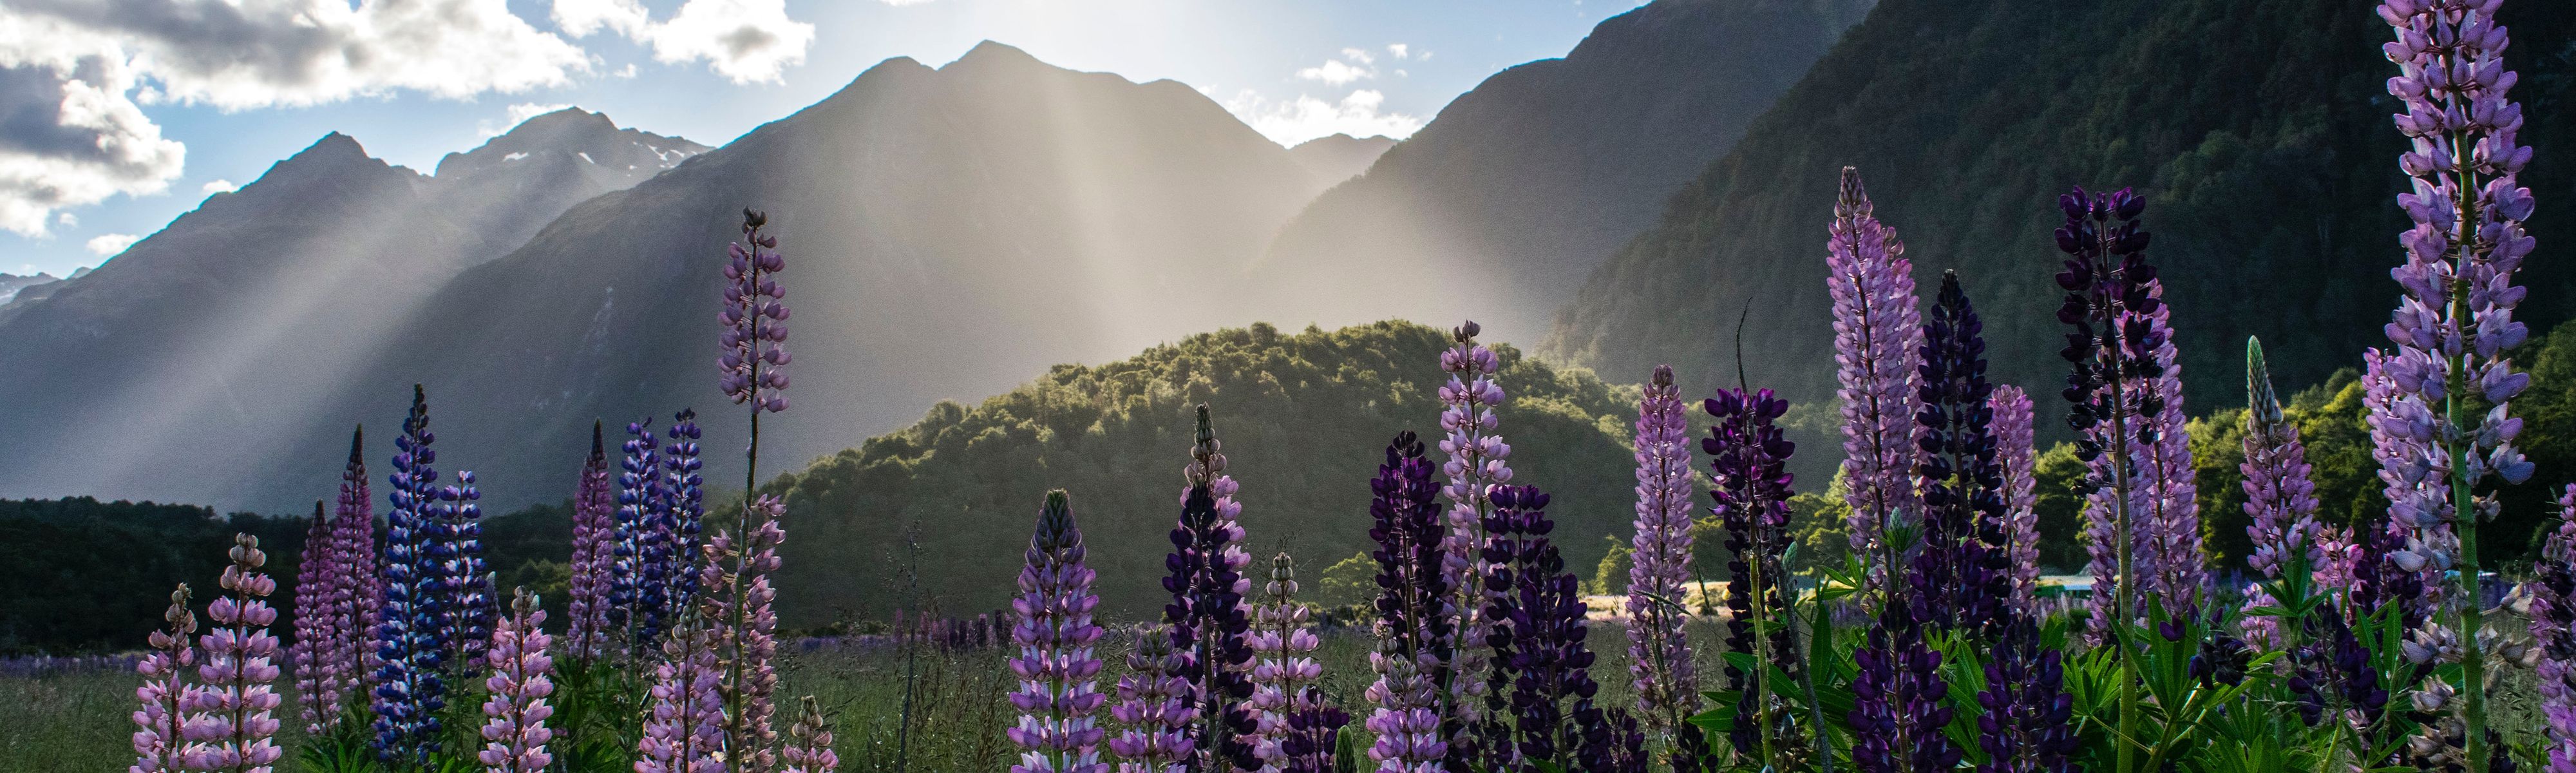 lupins surrounding mountains in new zealand at sunrise